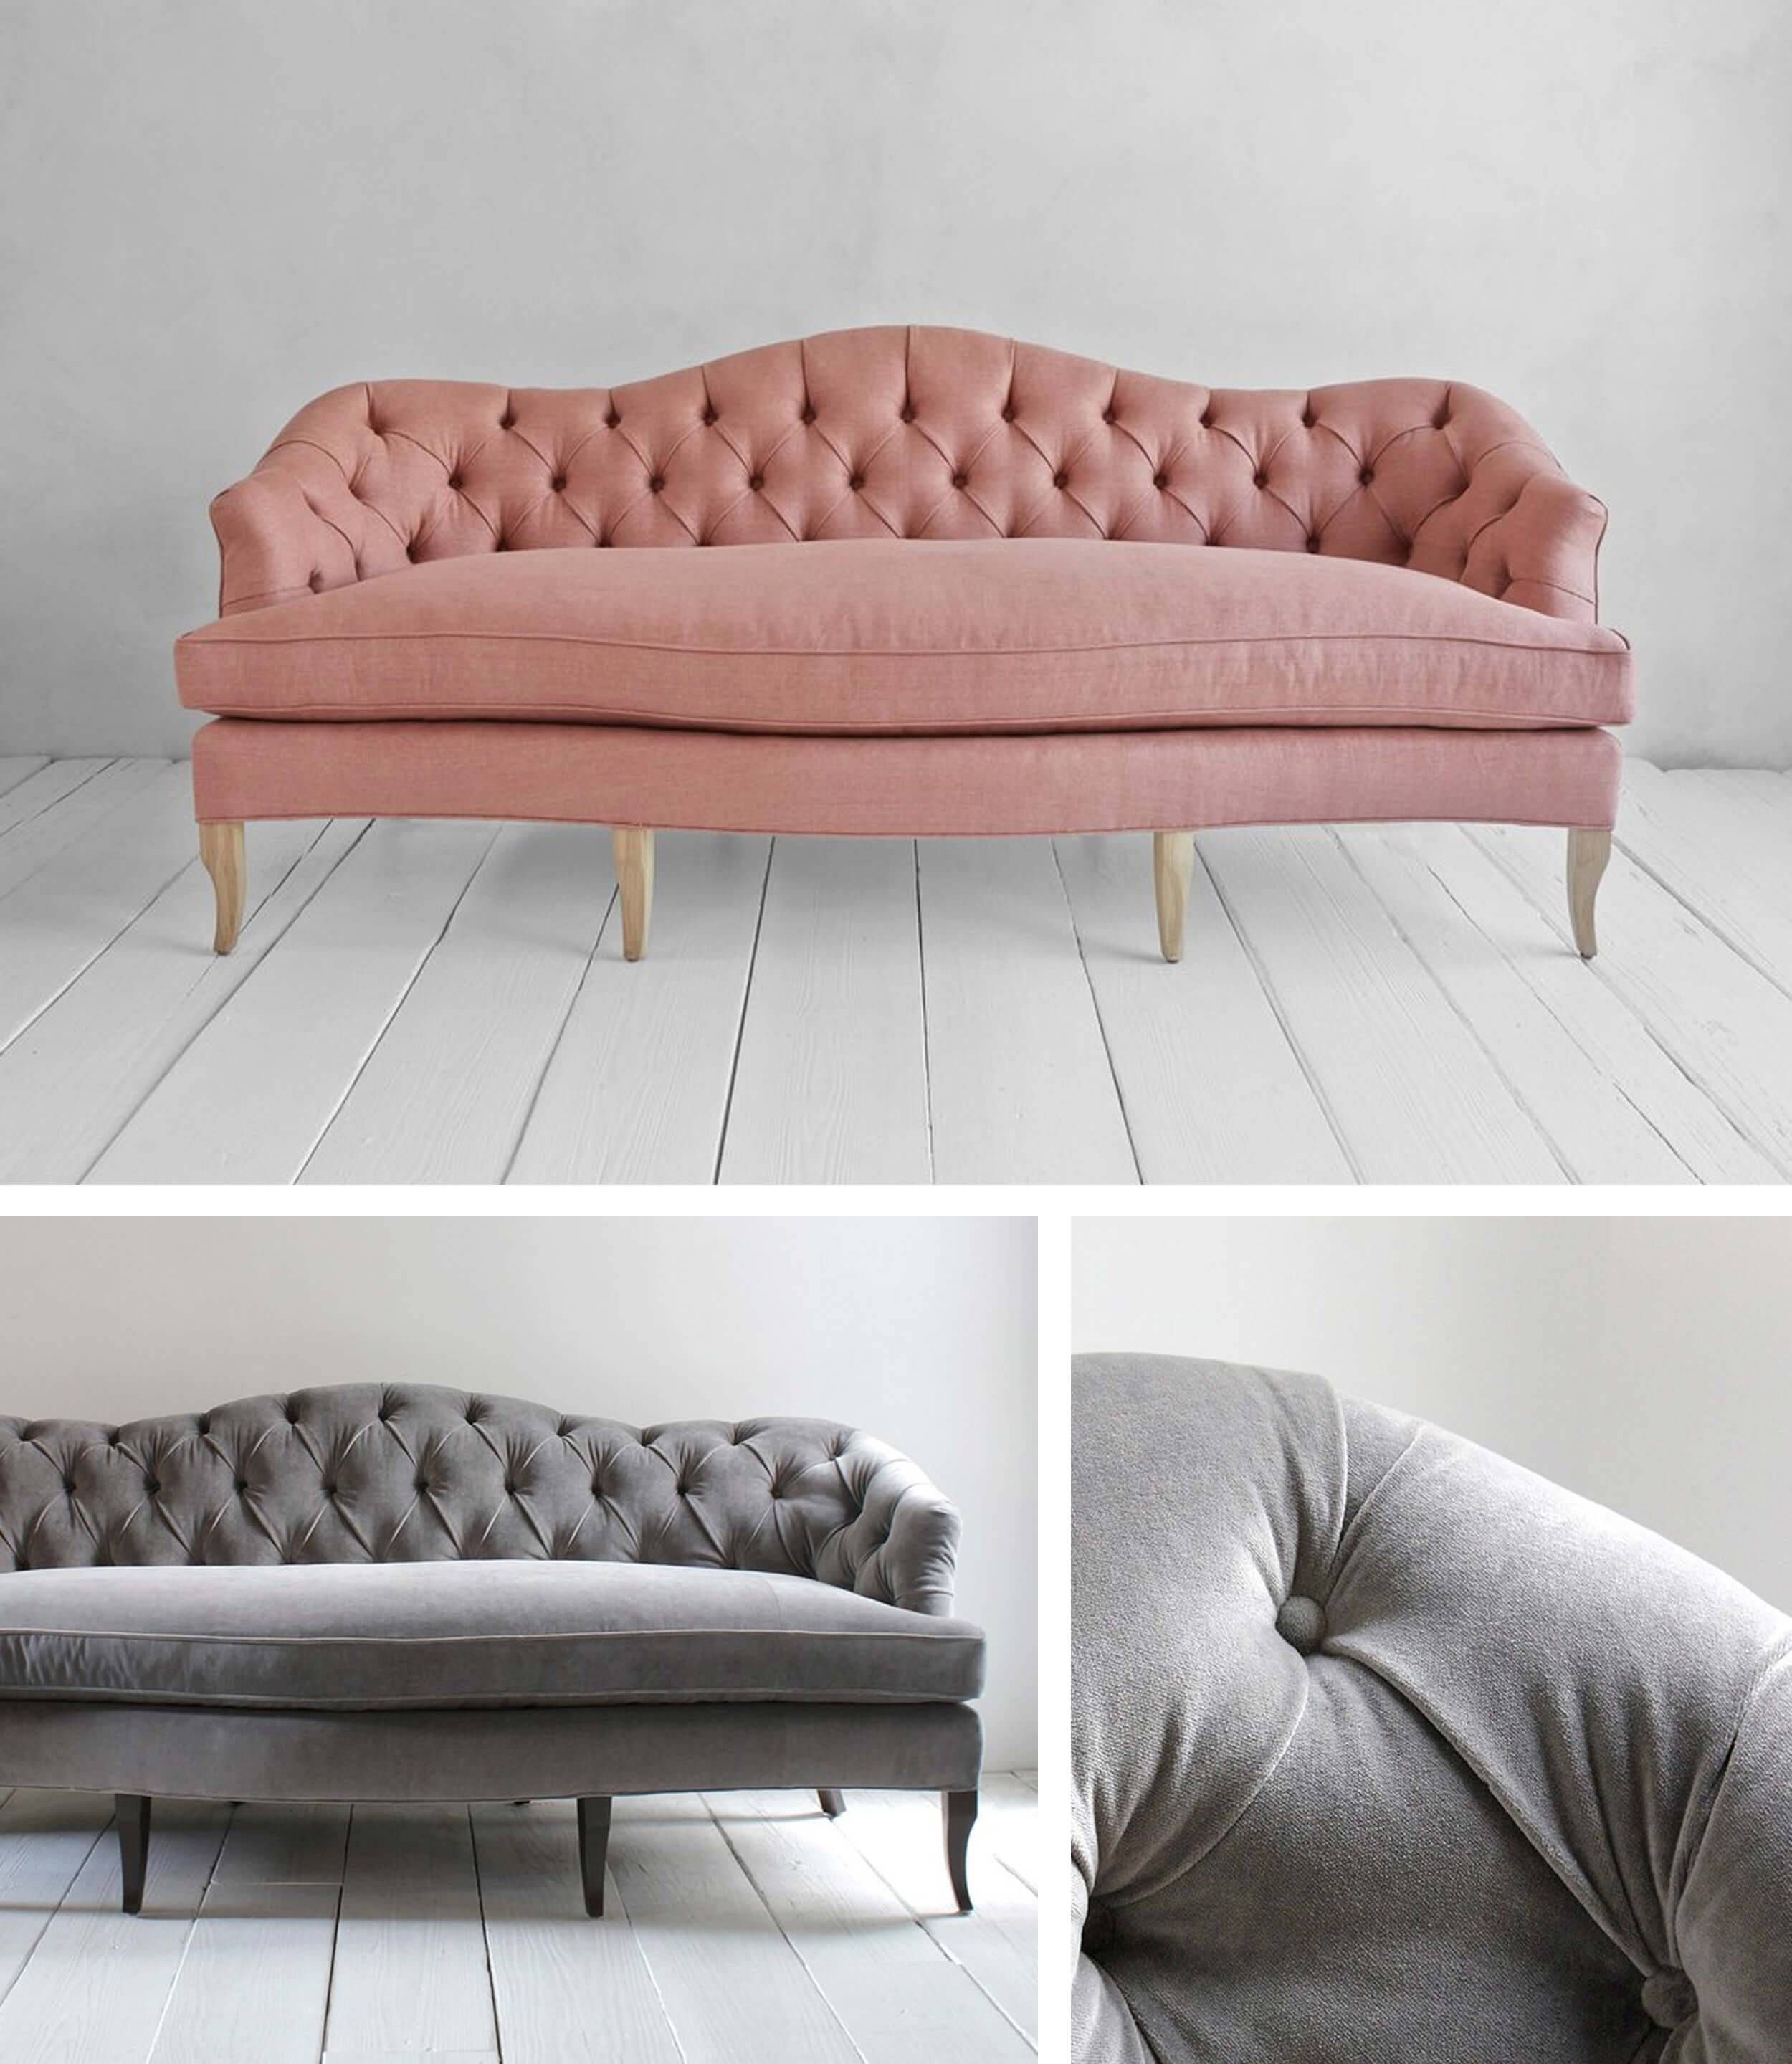 Furniture I Am Coveting For The New House – Emily Henderson For Affordable Tufted Sofa (View 8 of 30)